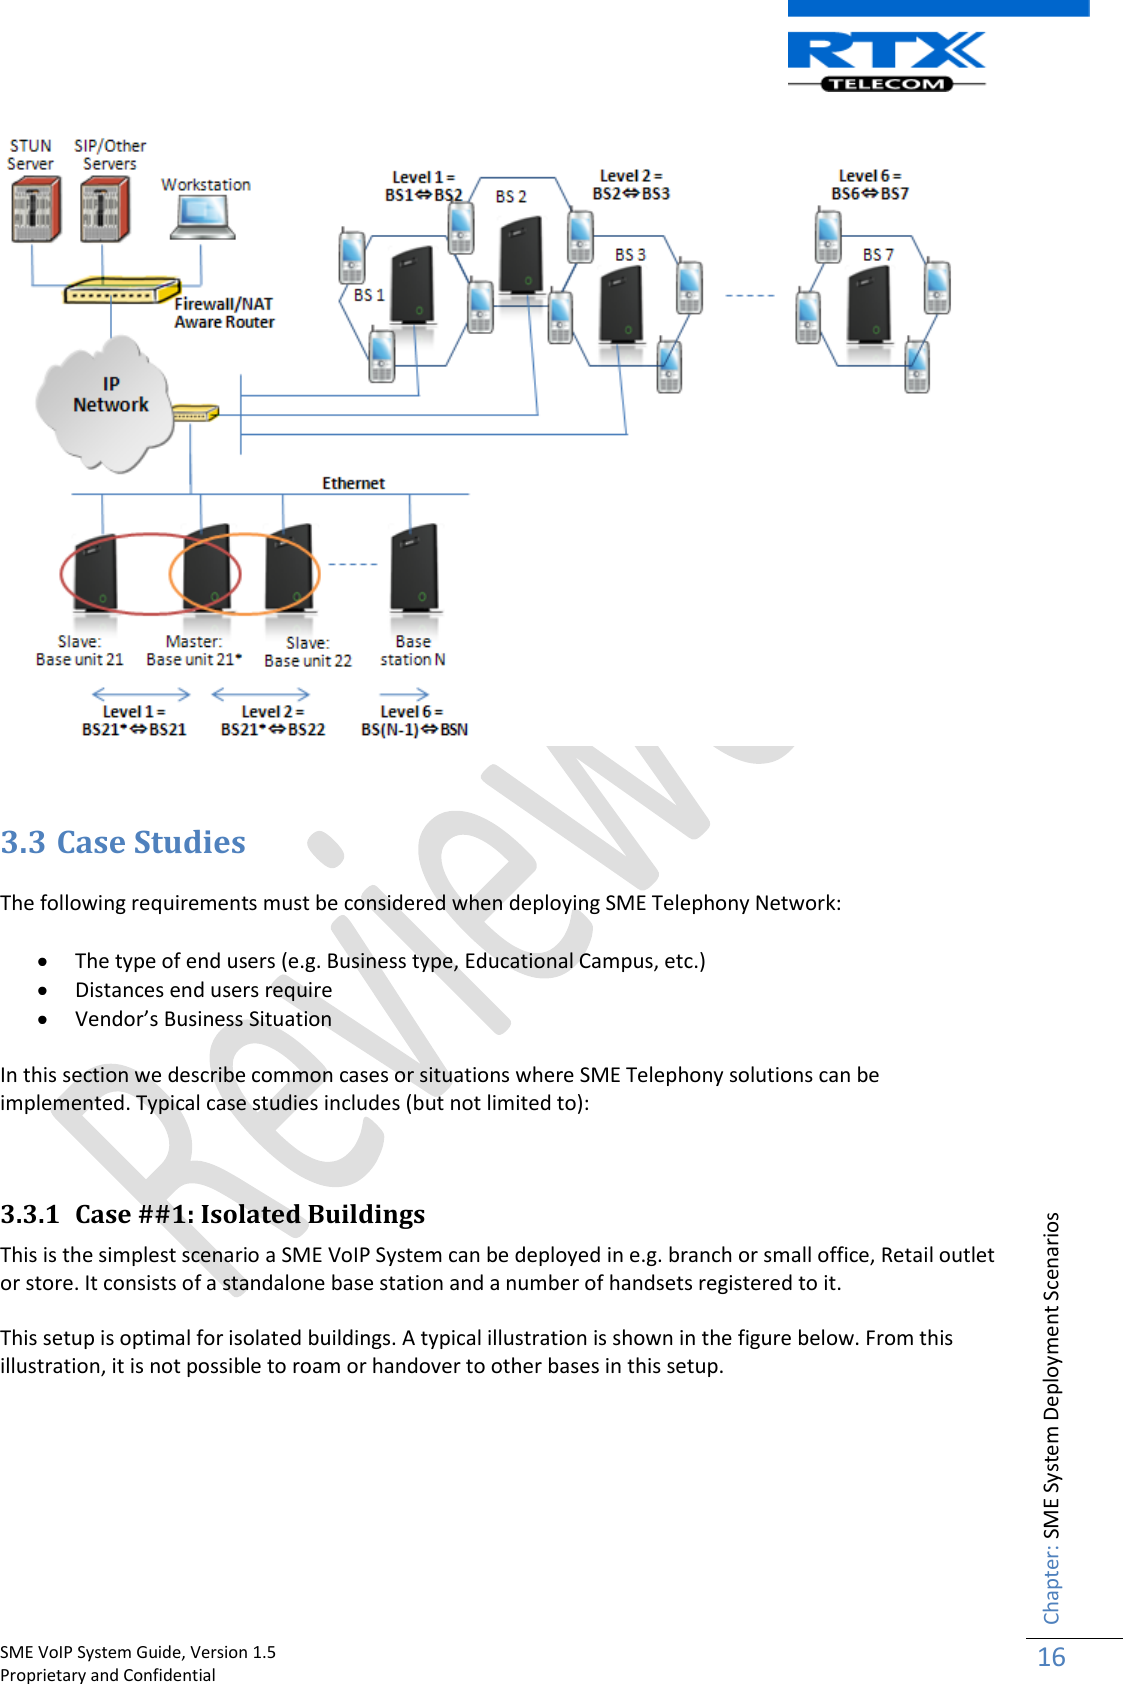    SME VoIP System Guide, Version 1.5                                                                                                                                                          Proprietary and Confidential    Chapter: SME System Deployment Scenarios 16      3.3 Case Studies   The following requirements must be considered when deploying SME Telephony Network:   The type of end users (e.g. Business type, Educational Campus, etc.)  Distances end users require  Vendor’s Business Situation  In this section we describe common cases or situations where SME Telephony solutions can be implemented. Typical case studies includes (but not limited to):   3.3.1 Case ##1: Isolated Buildings  This is the simplest scenario a SME VoIP System can be deployed in e.g. branch or small office, Retail outlet or store. It consists of a standalone base station and a number of handsets registered to it.  This setup is optimal for isolated buildings. A typical illustration is shown in the figure below. From this illustration, it is not possible to roam or handover to other bases in this setup.  